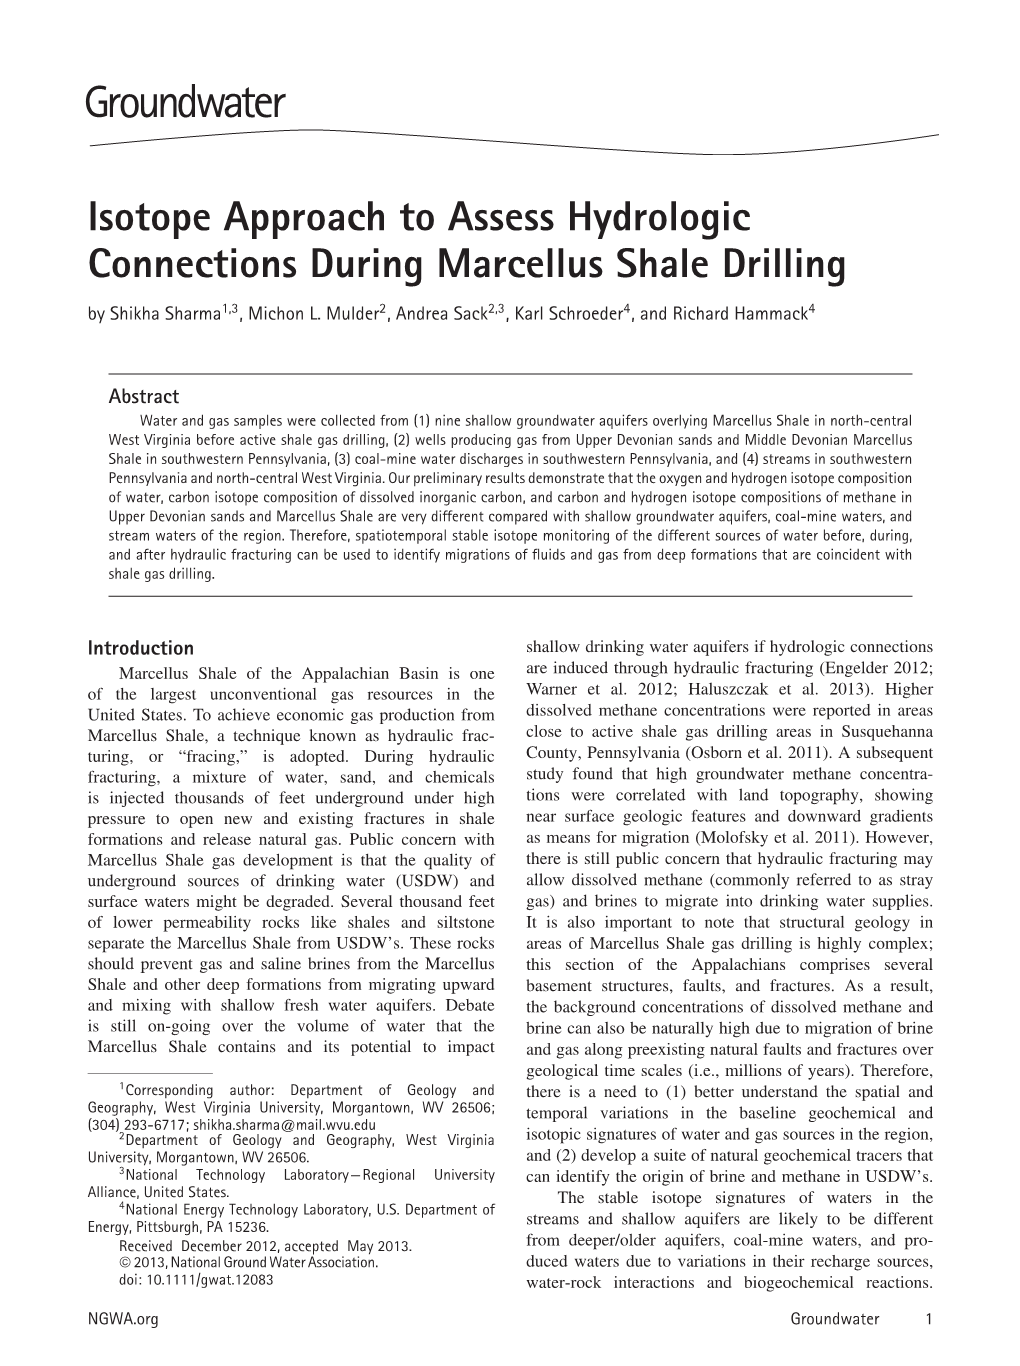 Isotope Approach to Assess Hydrologic Connections During